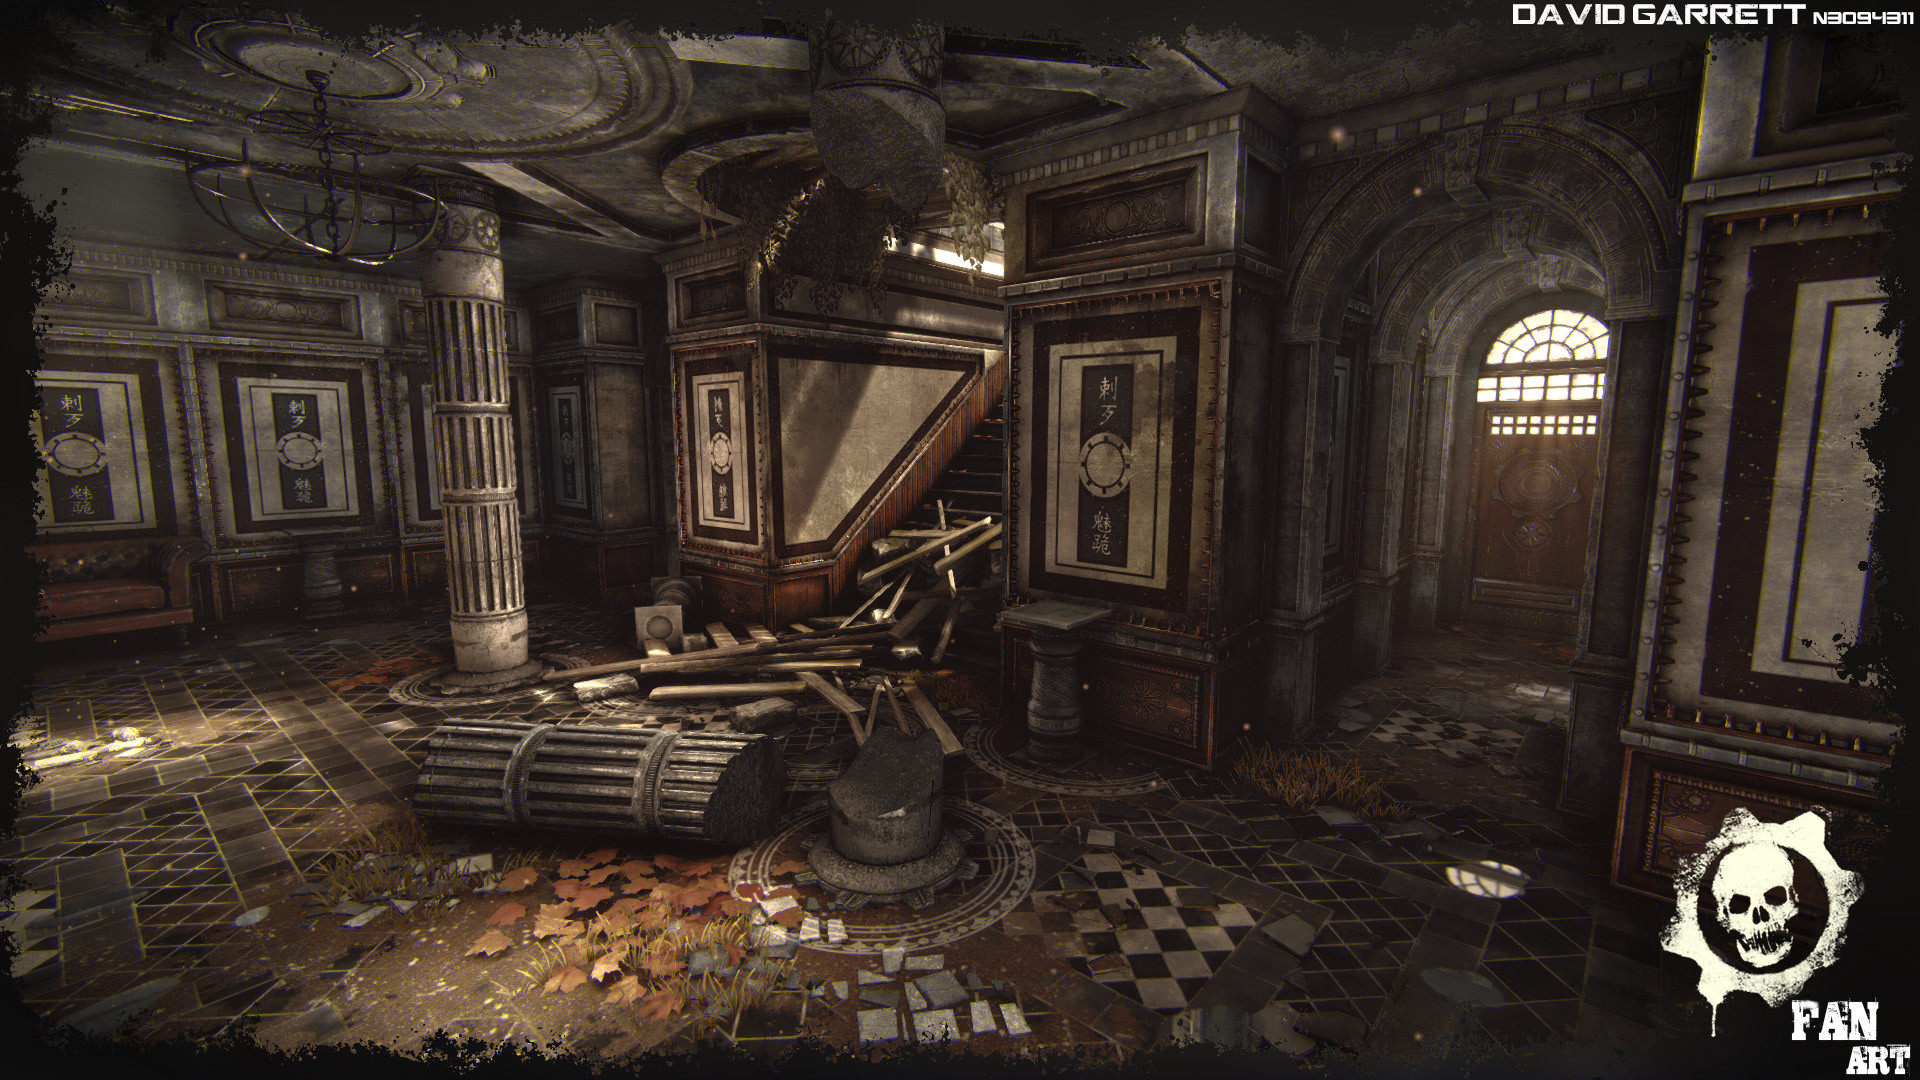 Gears Of War Map Recreated In Unreal Engine 4 Finished Project